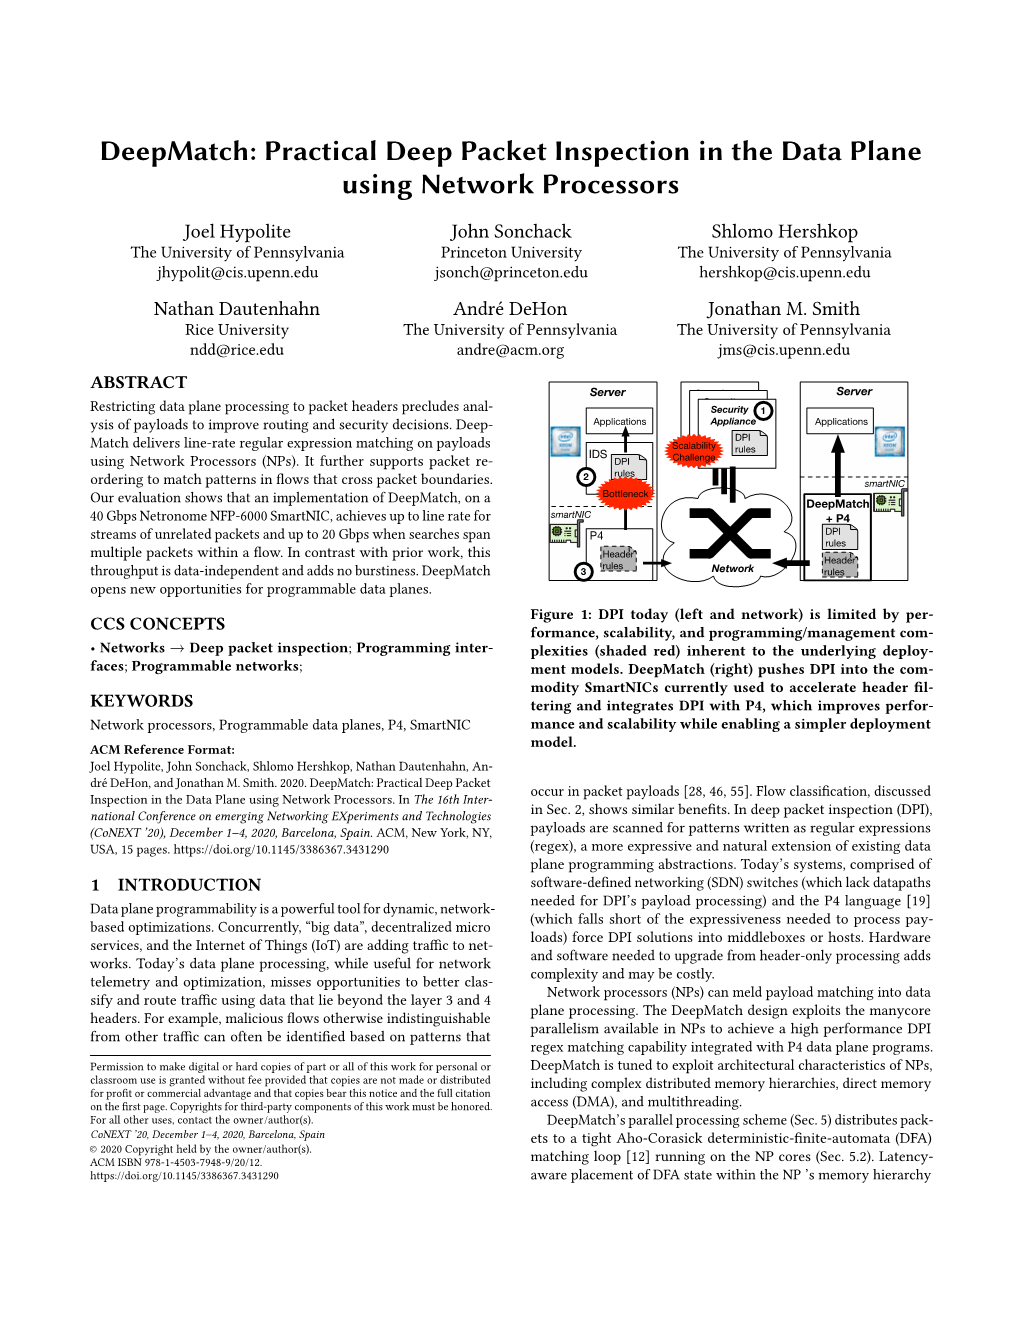 Deepmatch: Practical Deep Packet Inspection in the Data Plane Using Network Processors